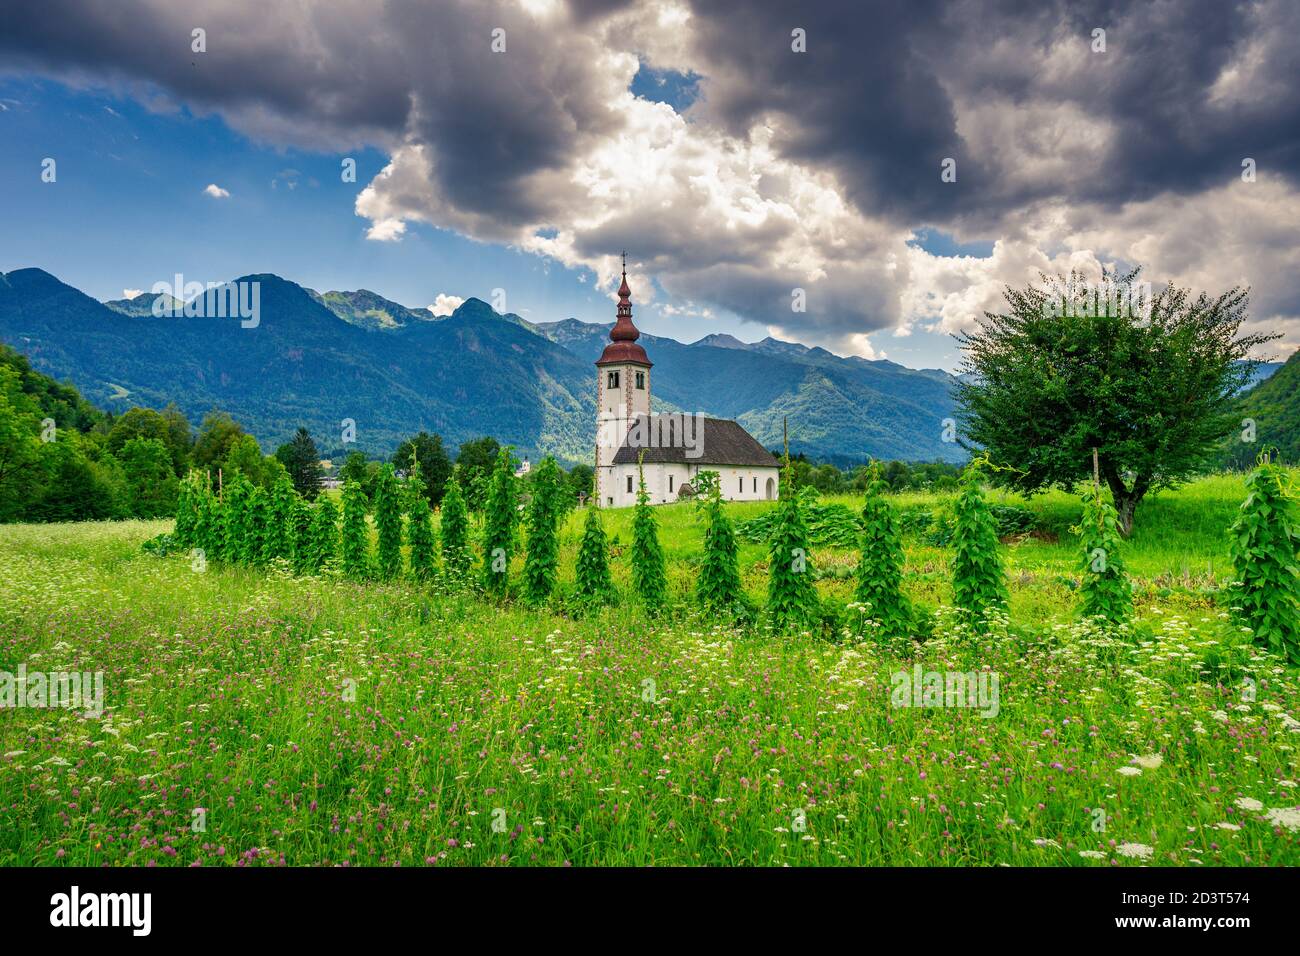 Church with agricultural sourrounding in the slovenian alpine area. Stock Photo